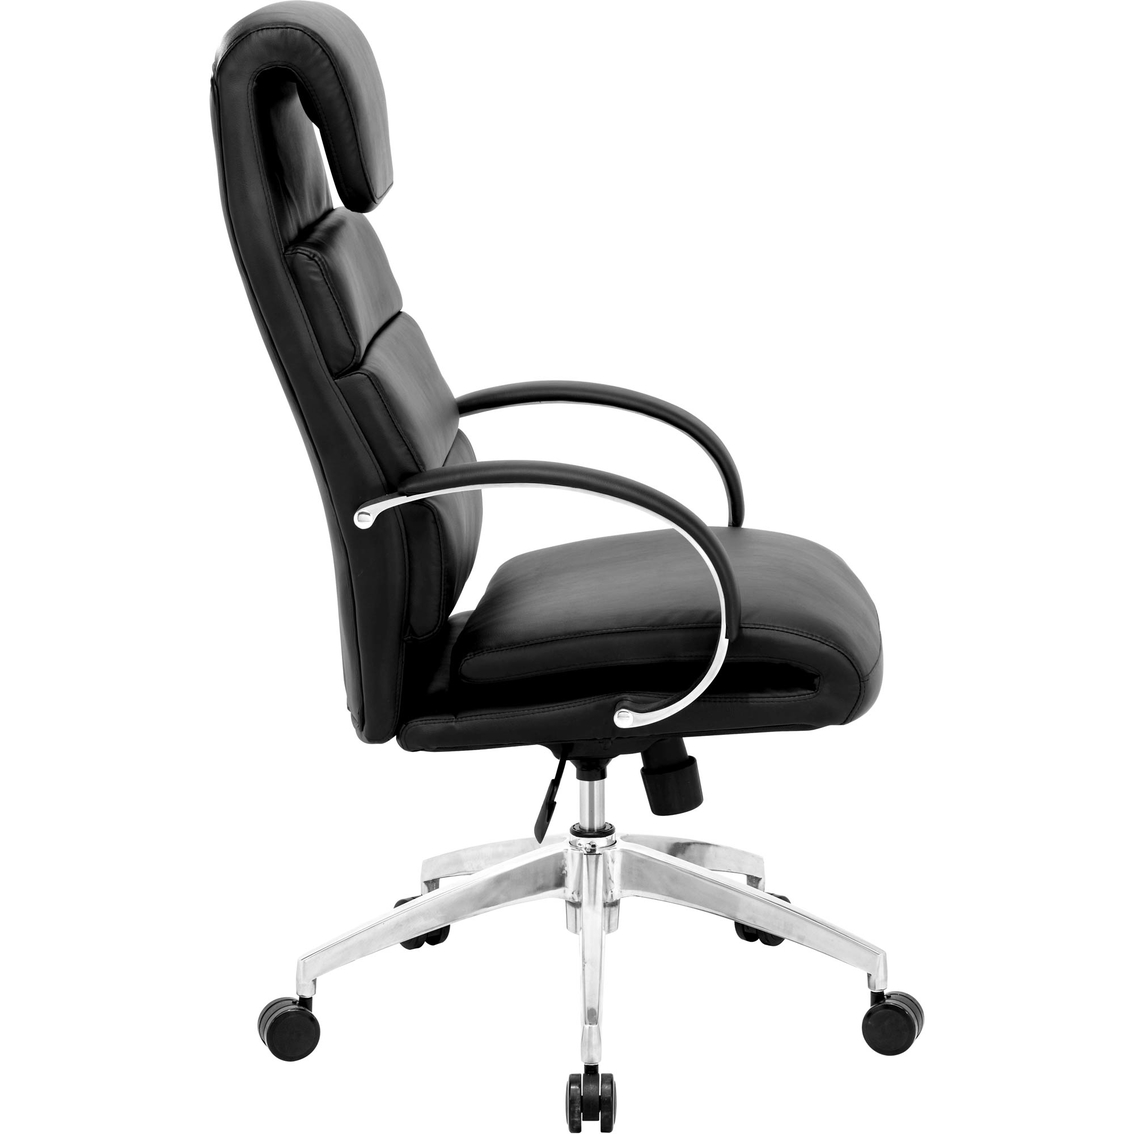 Zuo Lider Comfort Office Chair - Image 3 of 4